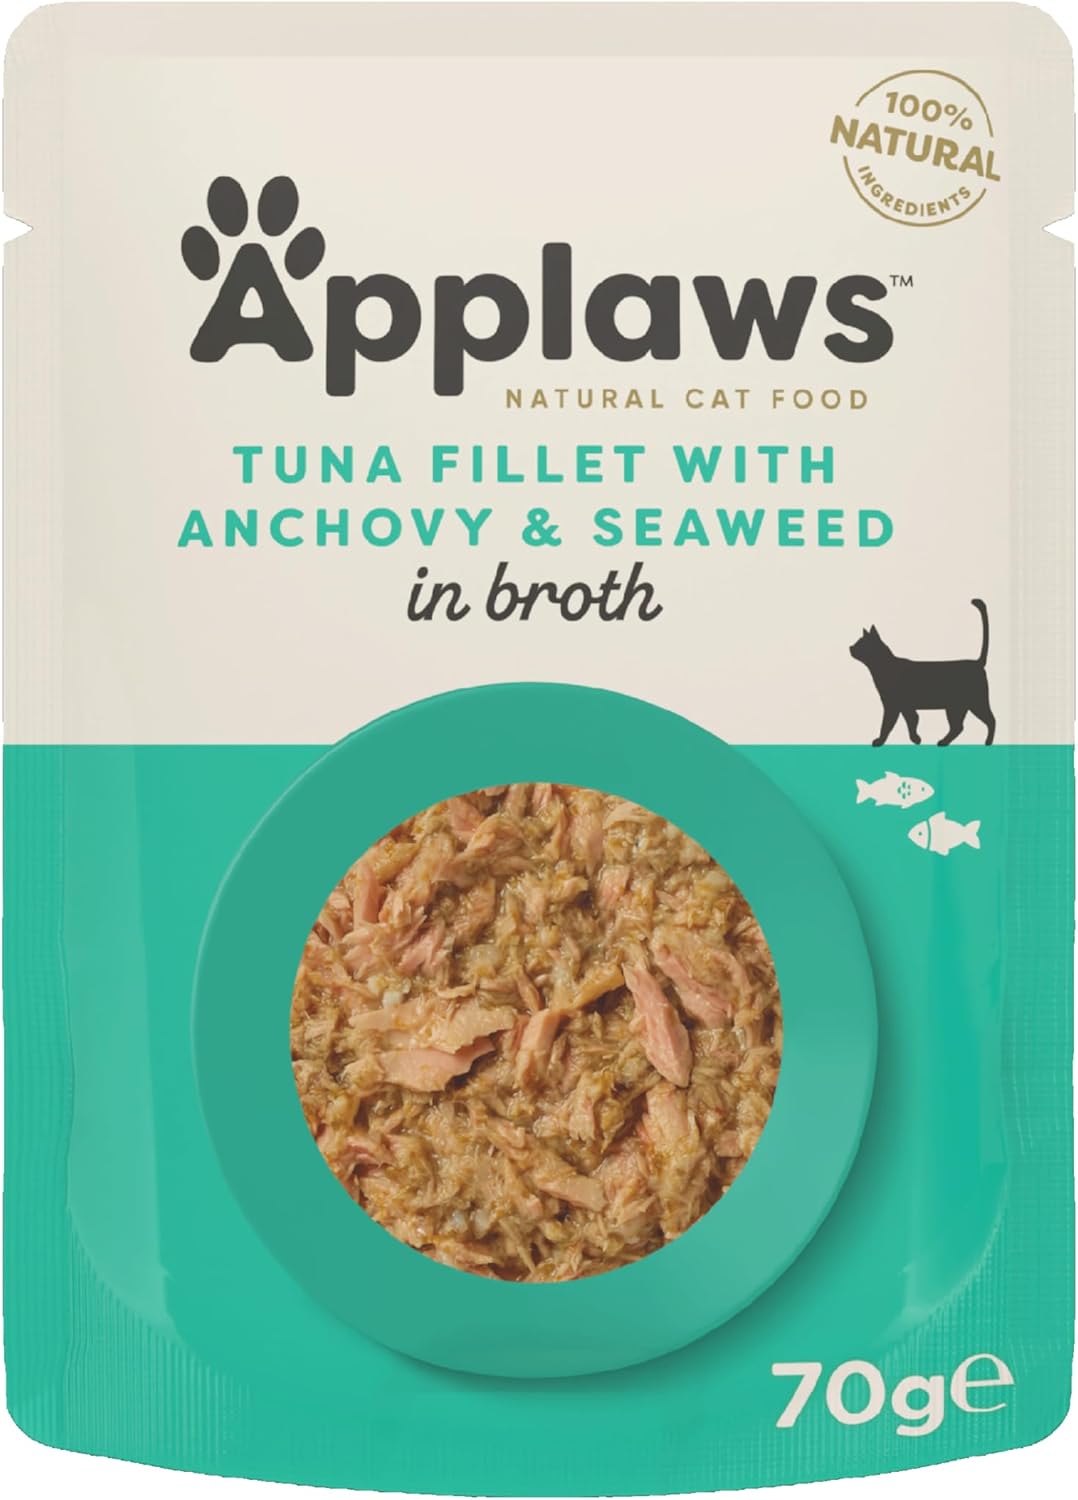 Applaws 100% Natural Wet Cat Food, Tuna Fillet with Anchovy in Broth, Pack of 12 x 70g Pouches?9100946